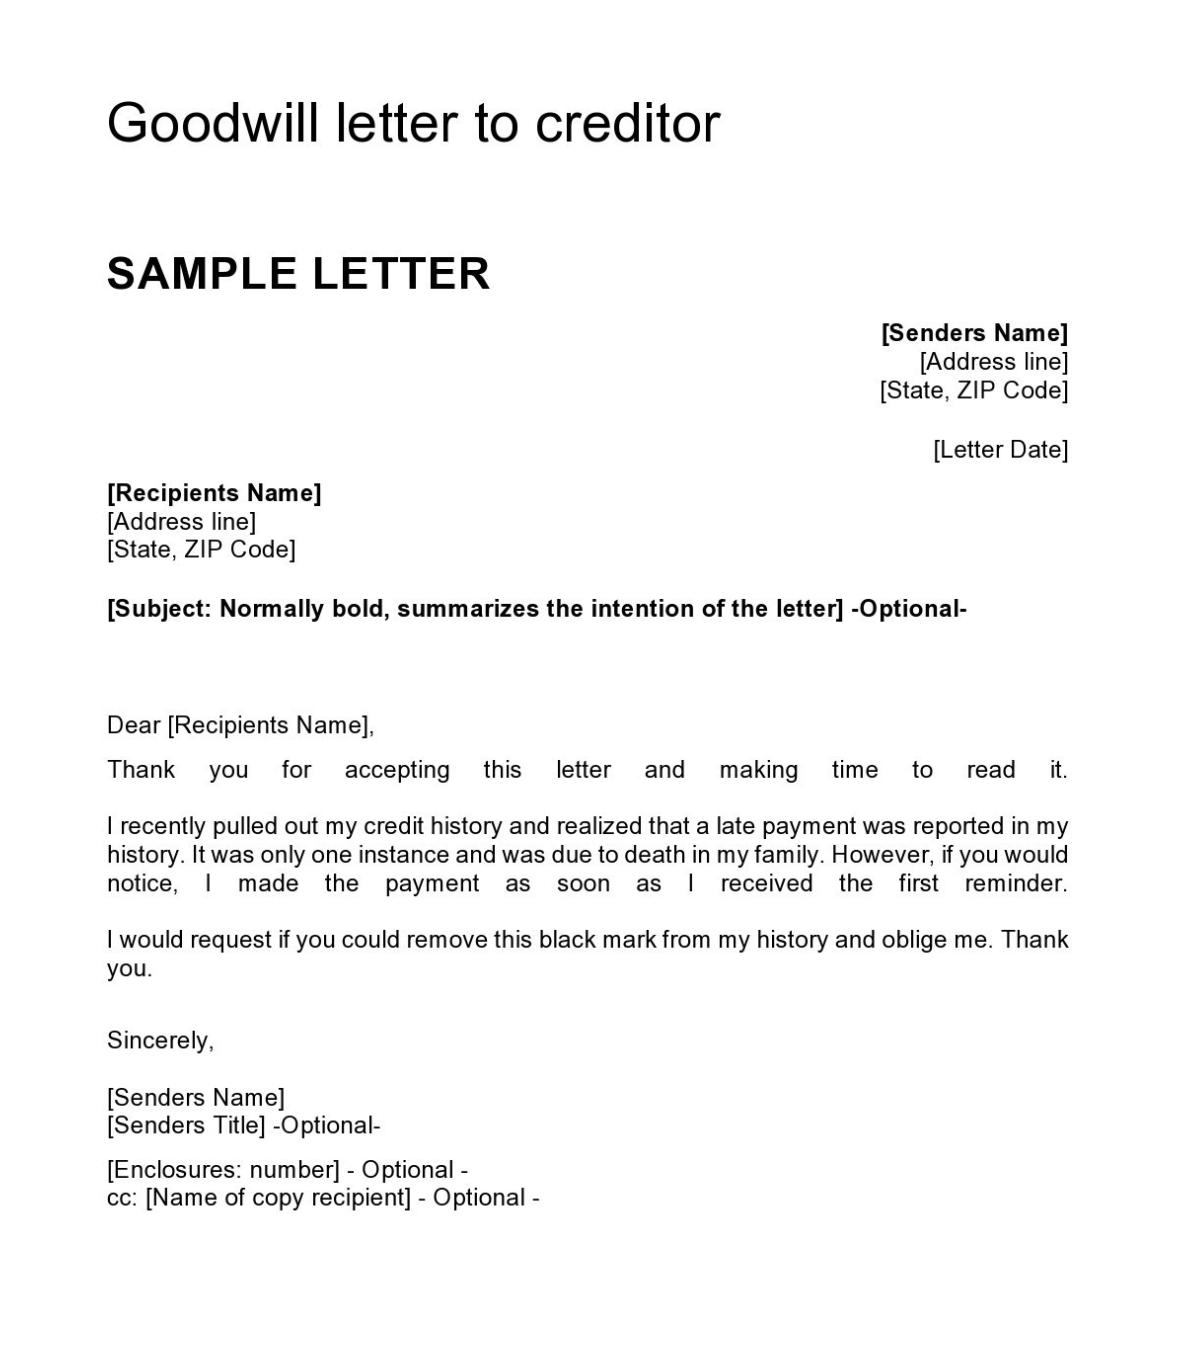 goodwill letter to creditor